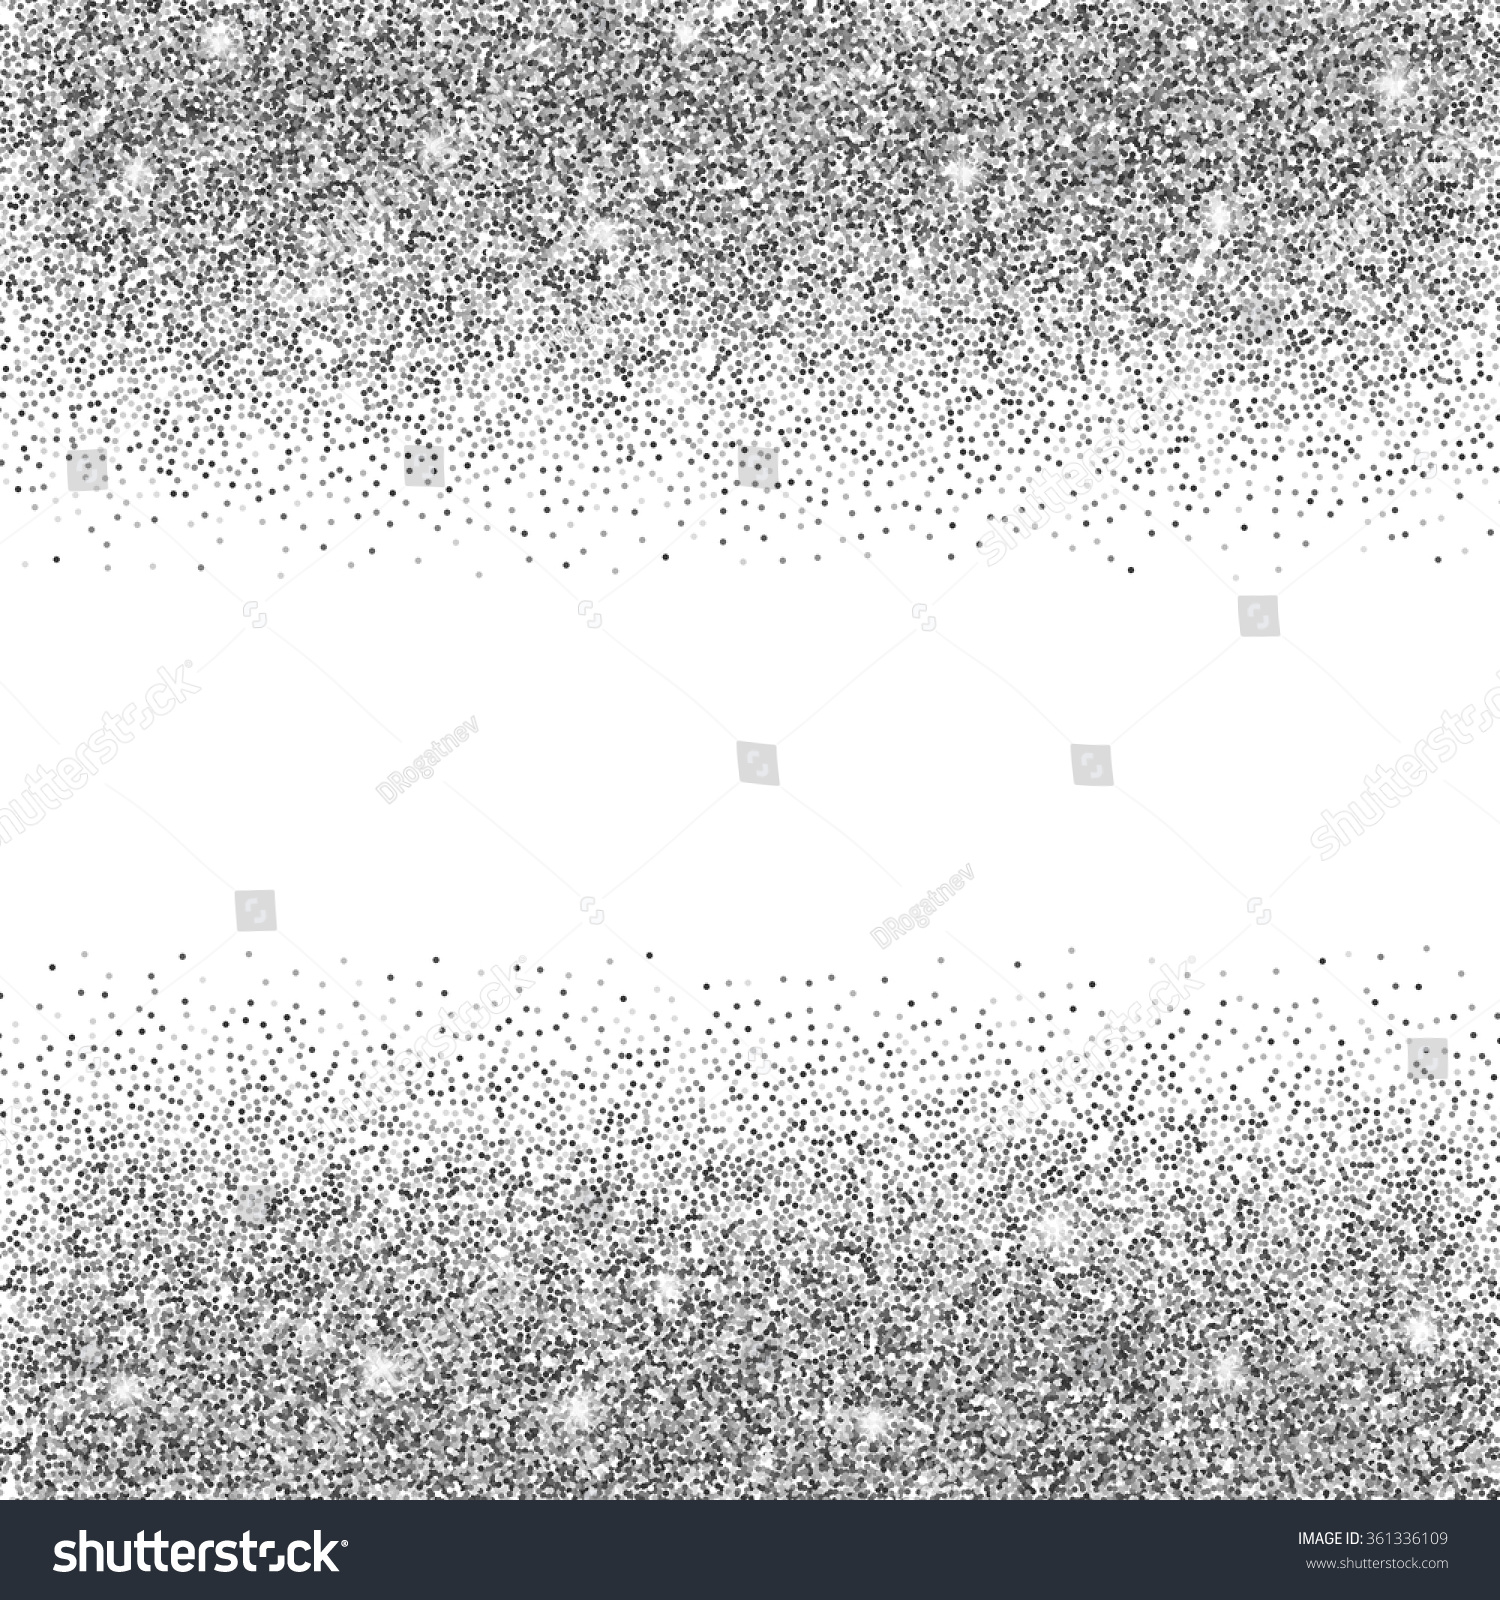 Silver Glitter Background Silver Sparkles On Stock Vector 361336109 ...